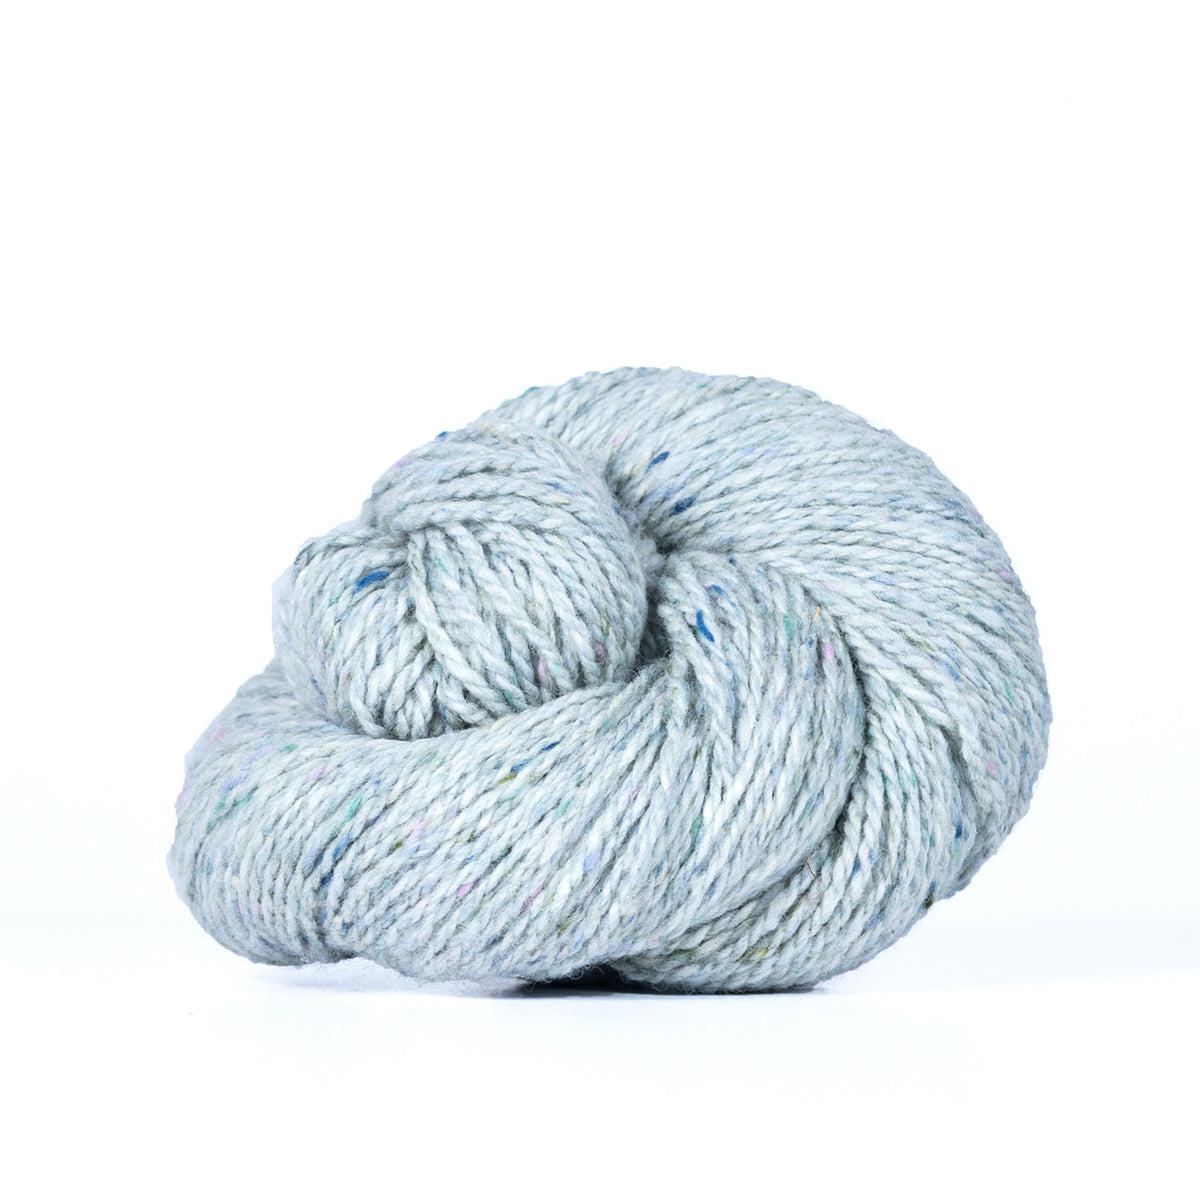 A skein of Kelbourne Woolens Lucky Tweed Fog, a bright light blue grey with white and darker blue flecks.